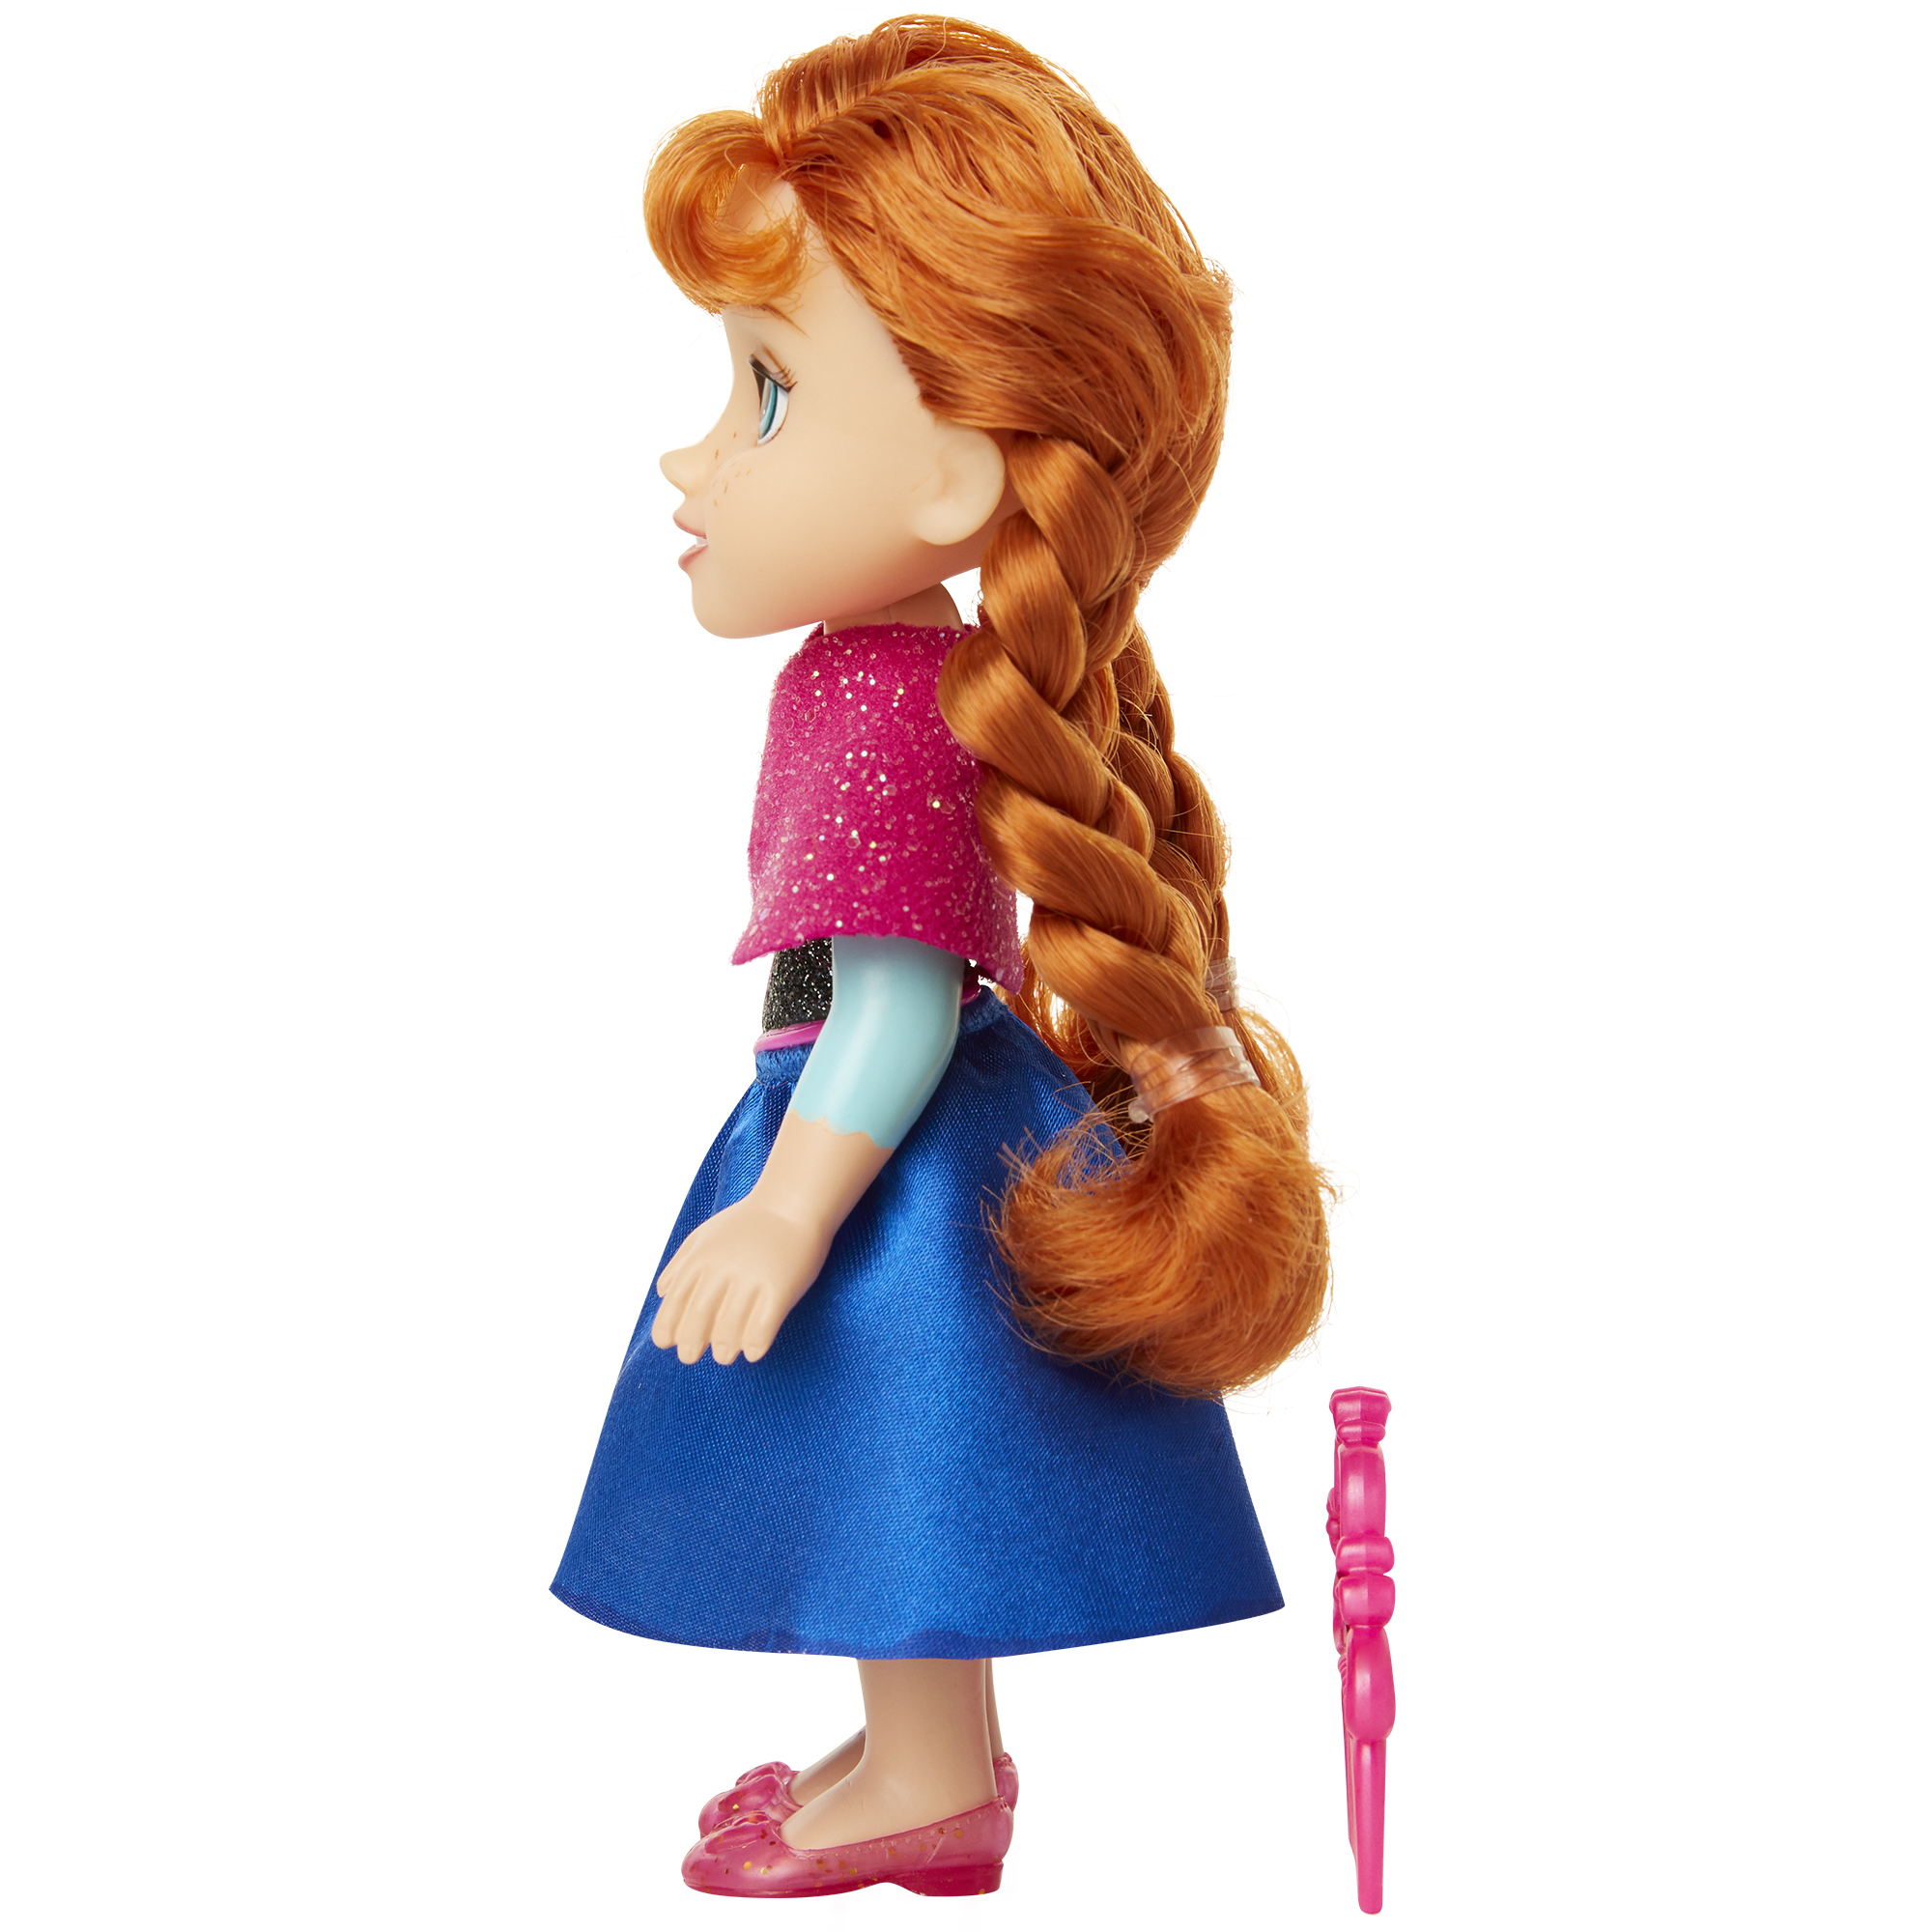 Disney Frozen Princess Anna 6" Petite Doll with Glittered Hard Bodice and Comb - image 3 of 6